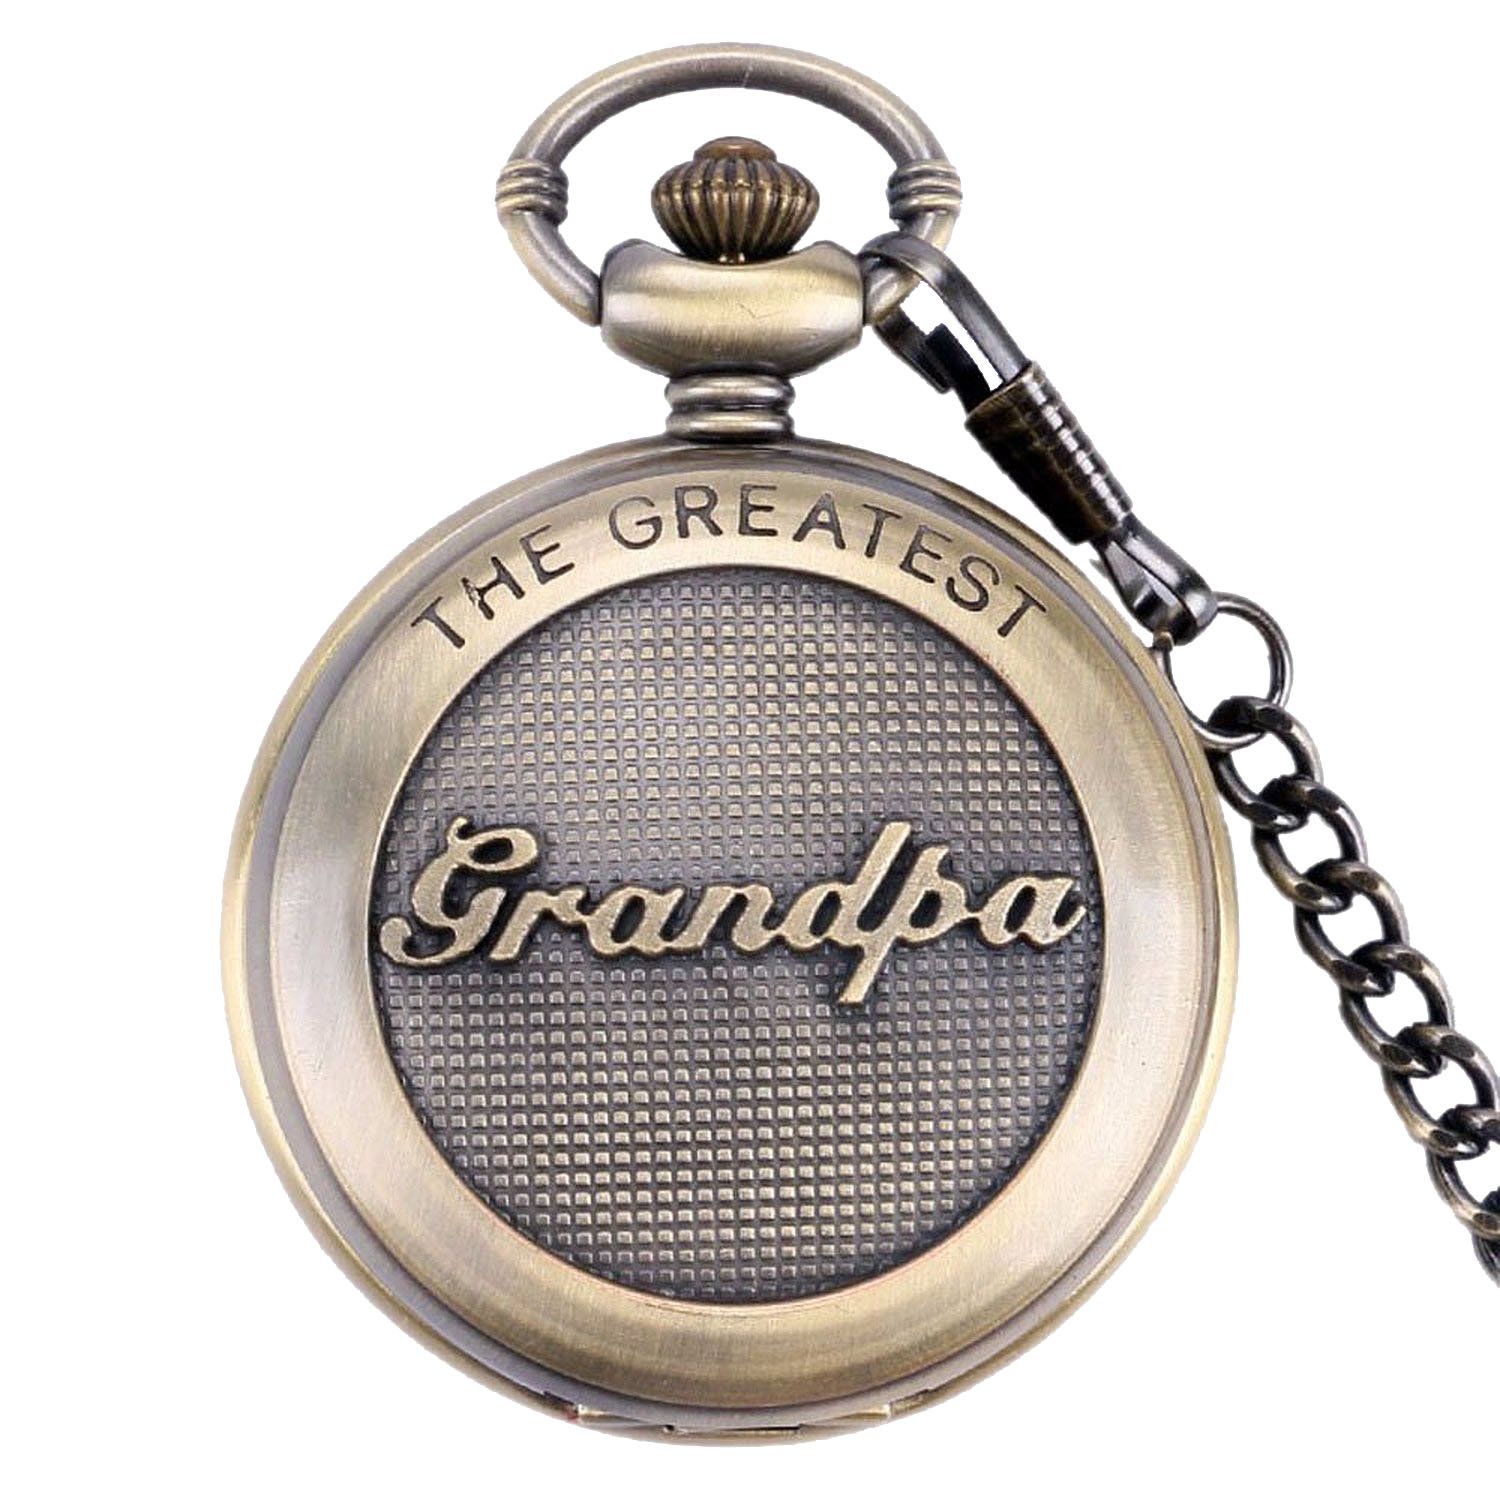 Realpoo Dad Gifts for Fathers Day Personalized Engraved Pocket Watch - Engraved Dad, Grandpa for Father's Day, Birthday Gift, Men's Quartz Pocket Watch with Chain for Christmas